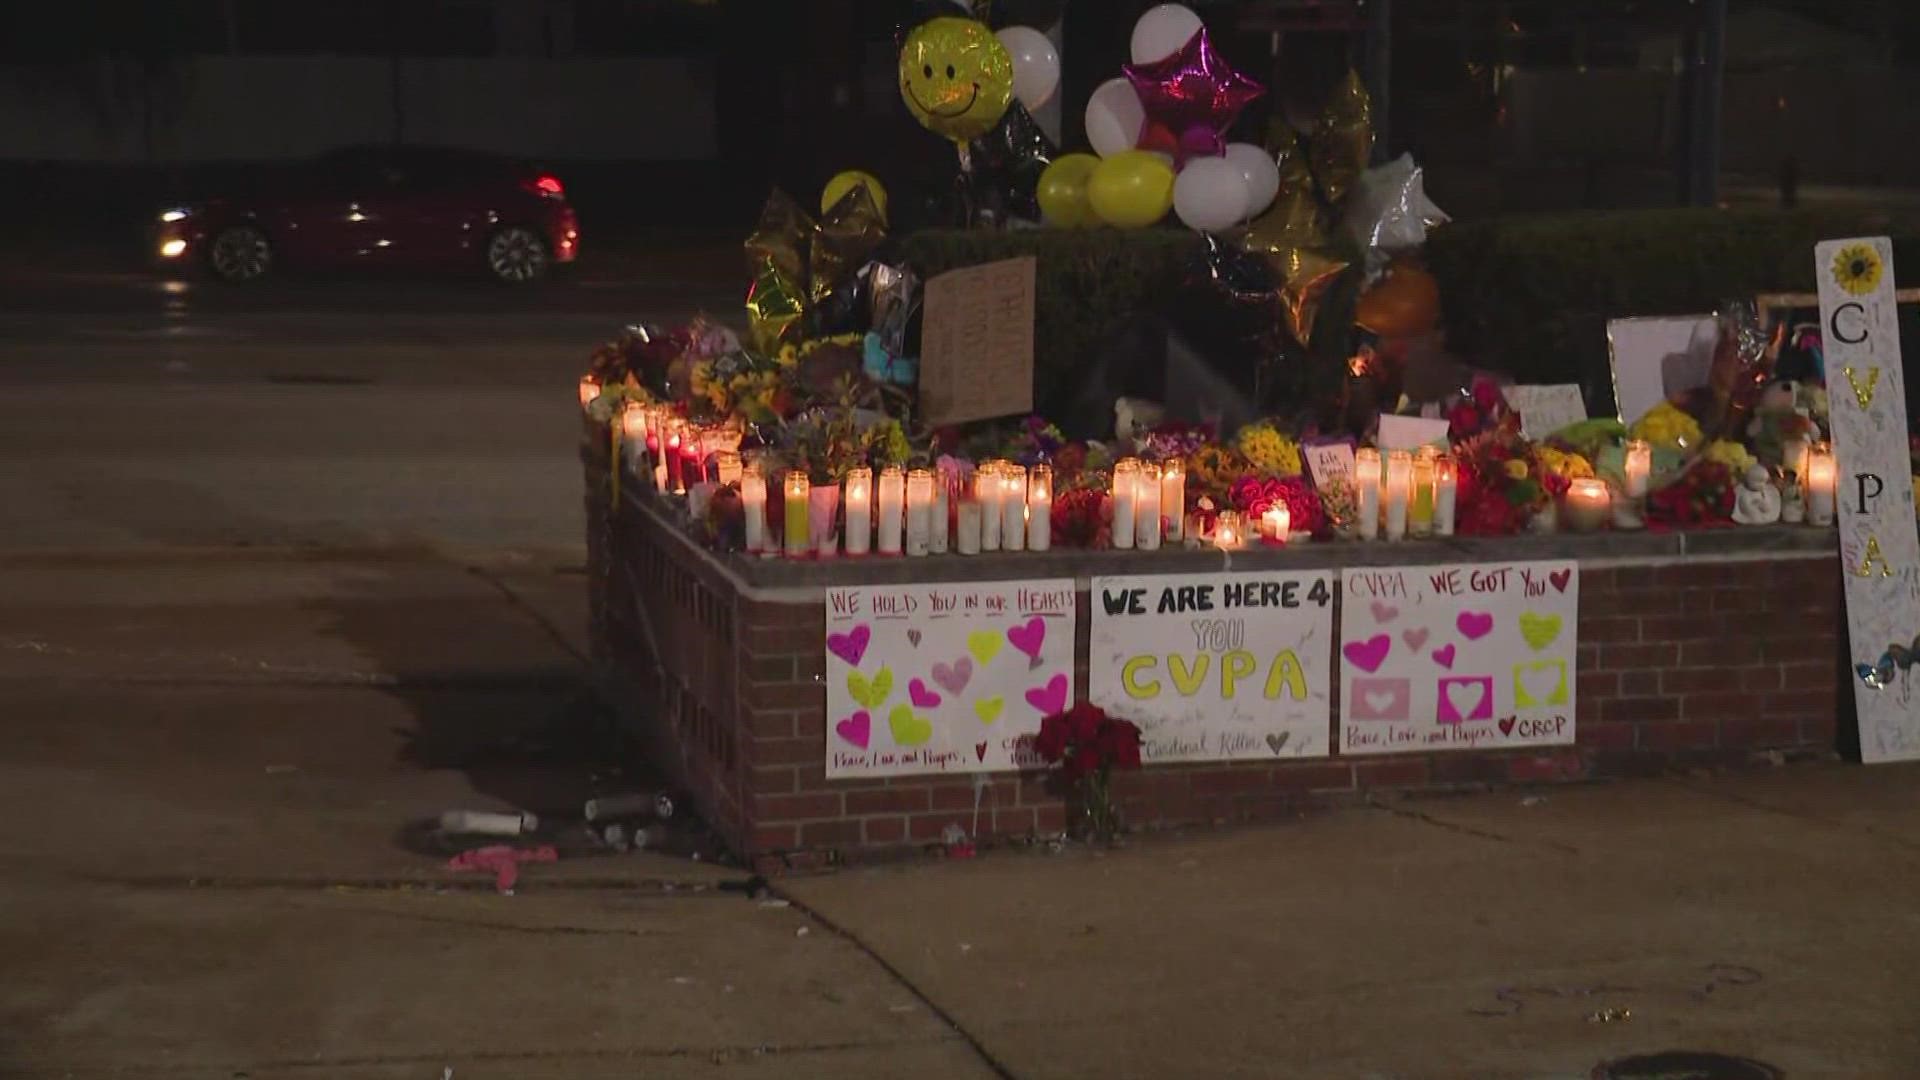 A 15-year-old student and health teacher were shot and killed in a shooting at Central VPA High School in south St. Louis. Here’s how they’re being remembered.